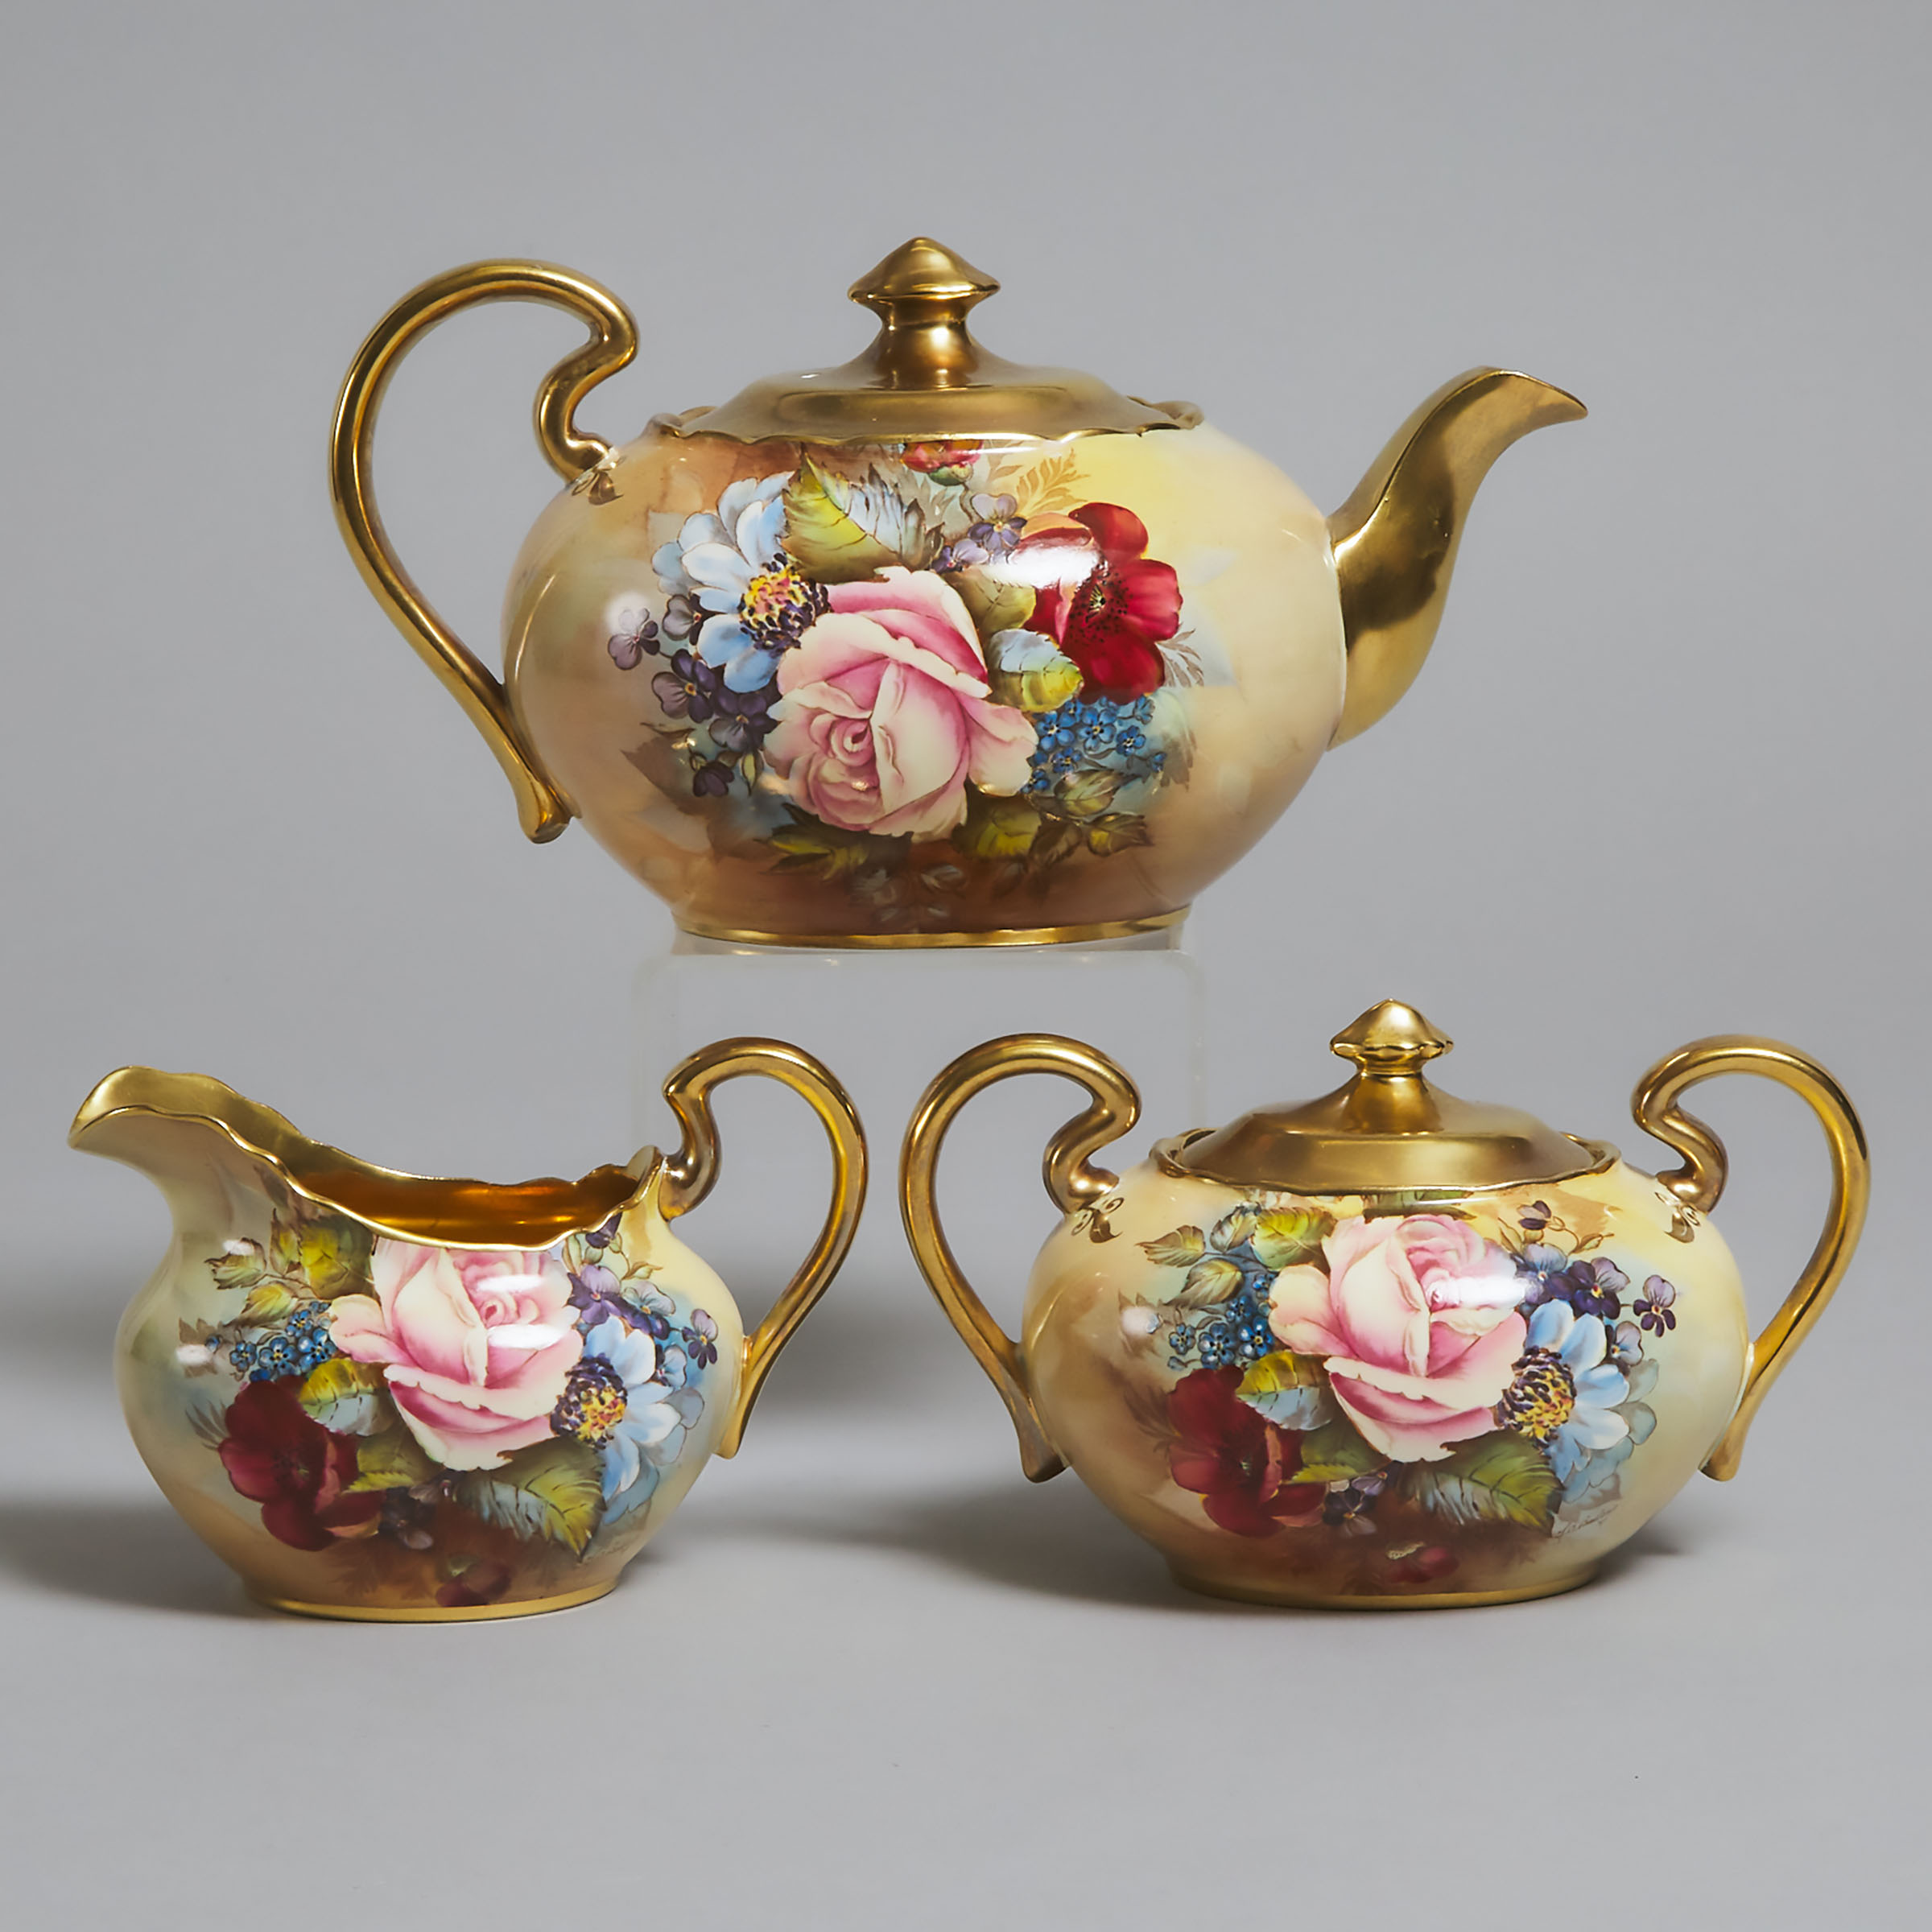 Aynsley 'Cabbage Rose' Teapot, Cream Jug and Covered Sugar Basin, J.A. Bailey, 20th century